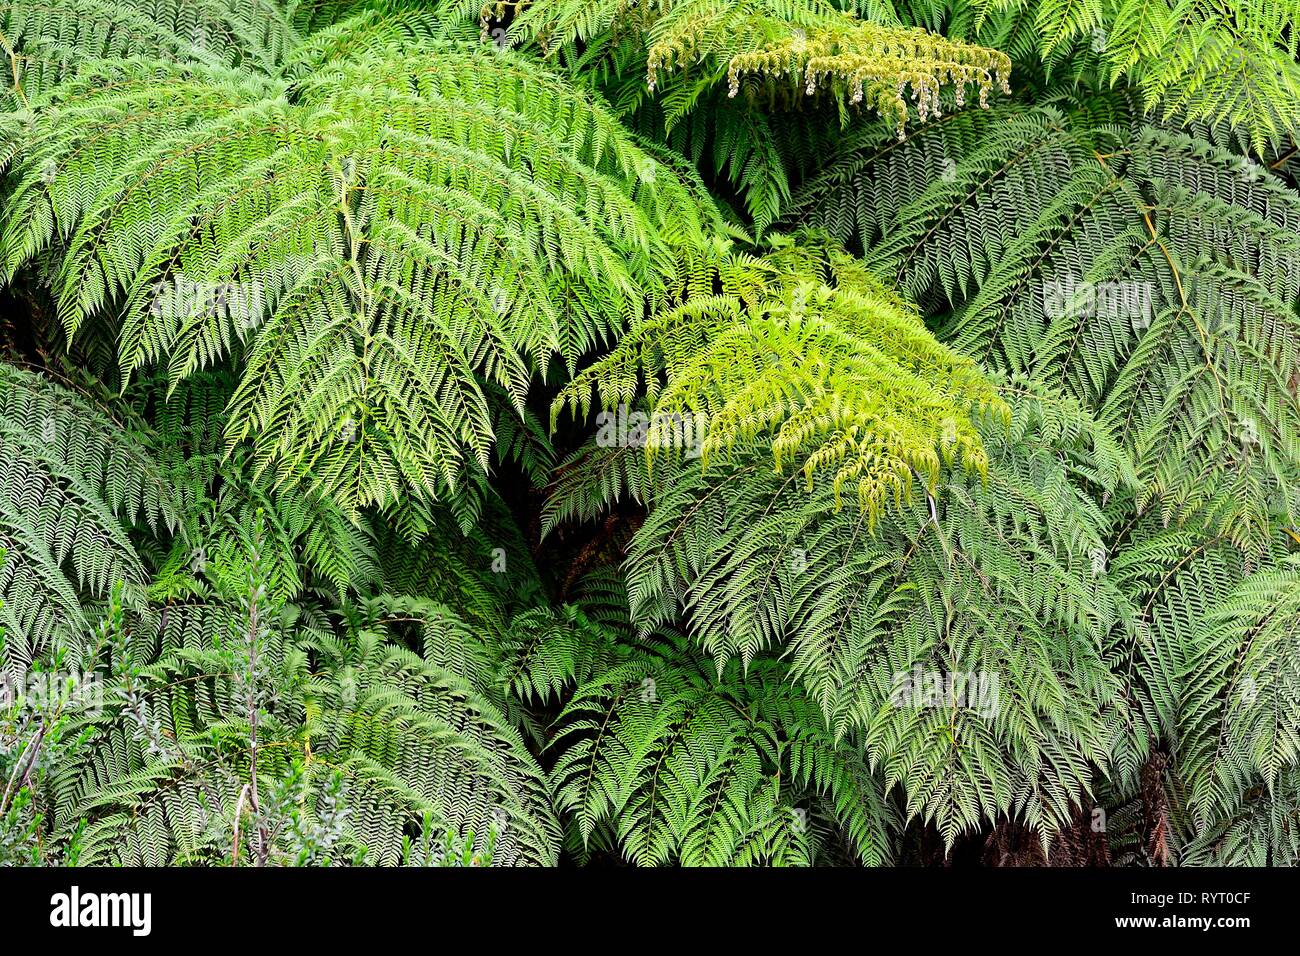 Feathered leaves a fern (Tracheophyta), temperate rainforest, Parque Pumalin, province of Palena, Región de los Lagos, Chile Stock Photo